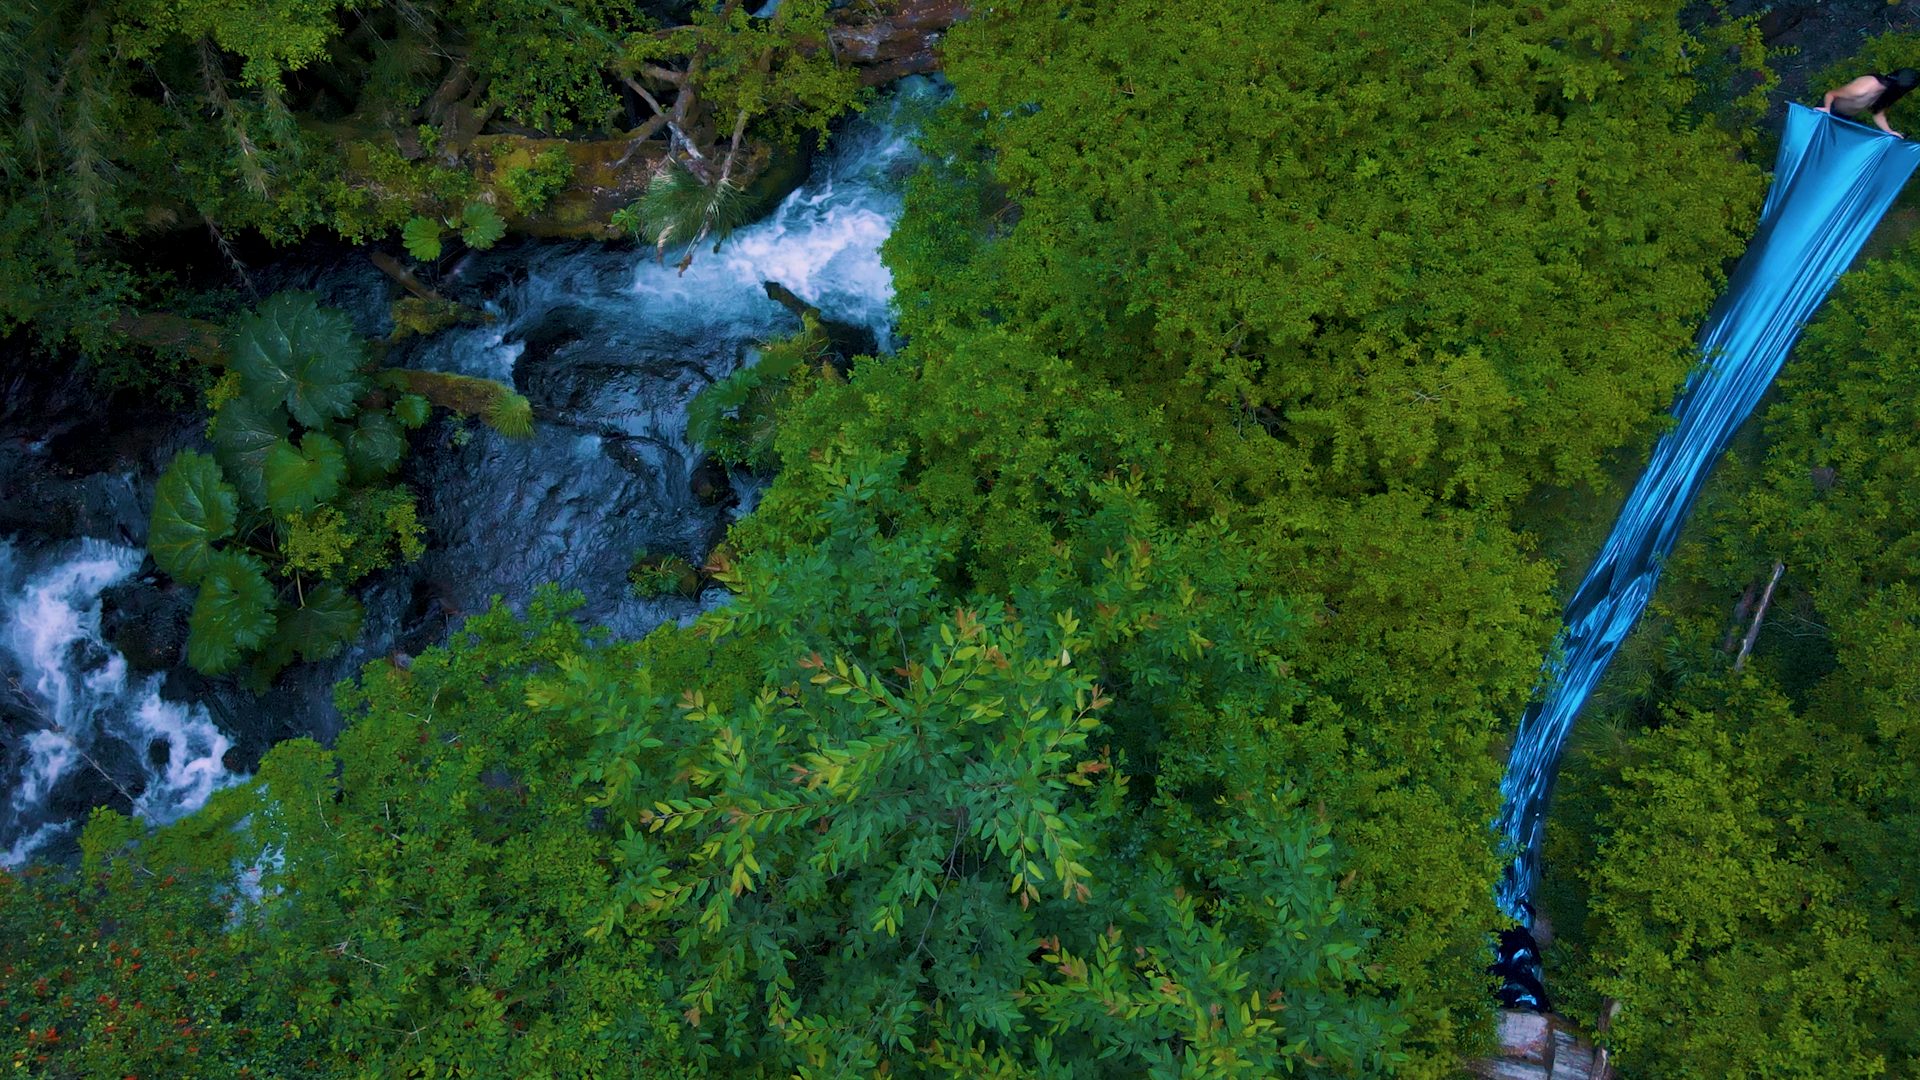 Aerial view of a person lying on a hammock over a lush forest with a river running below.